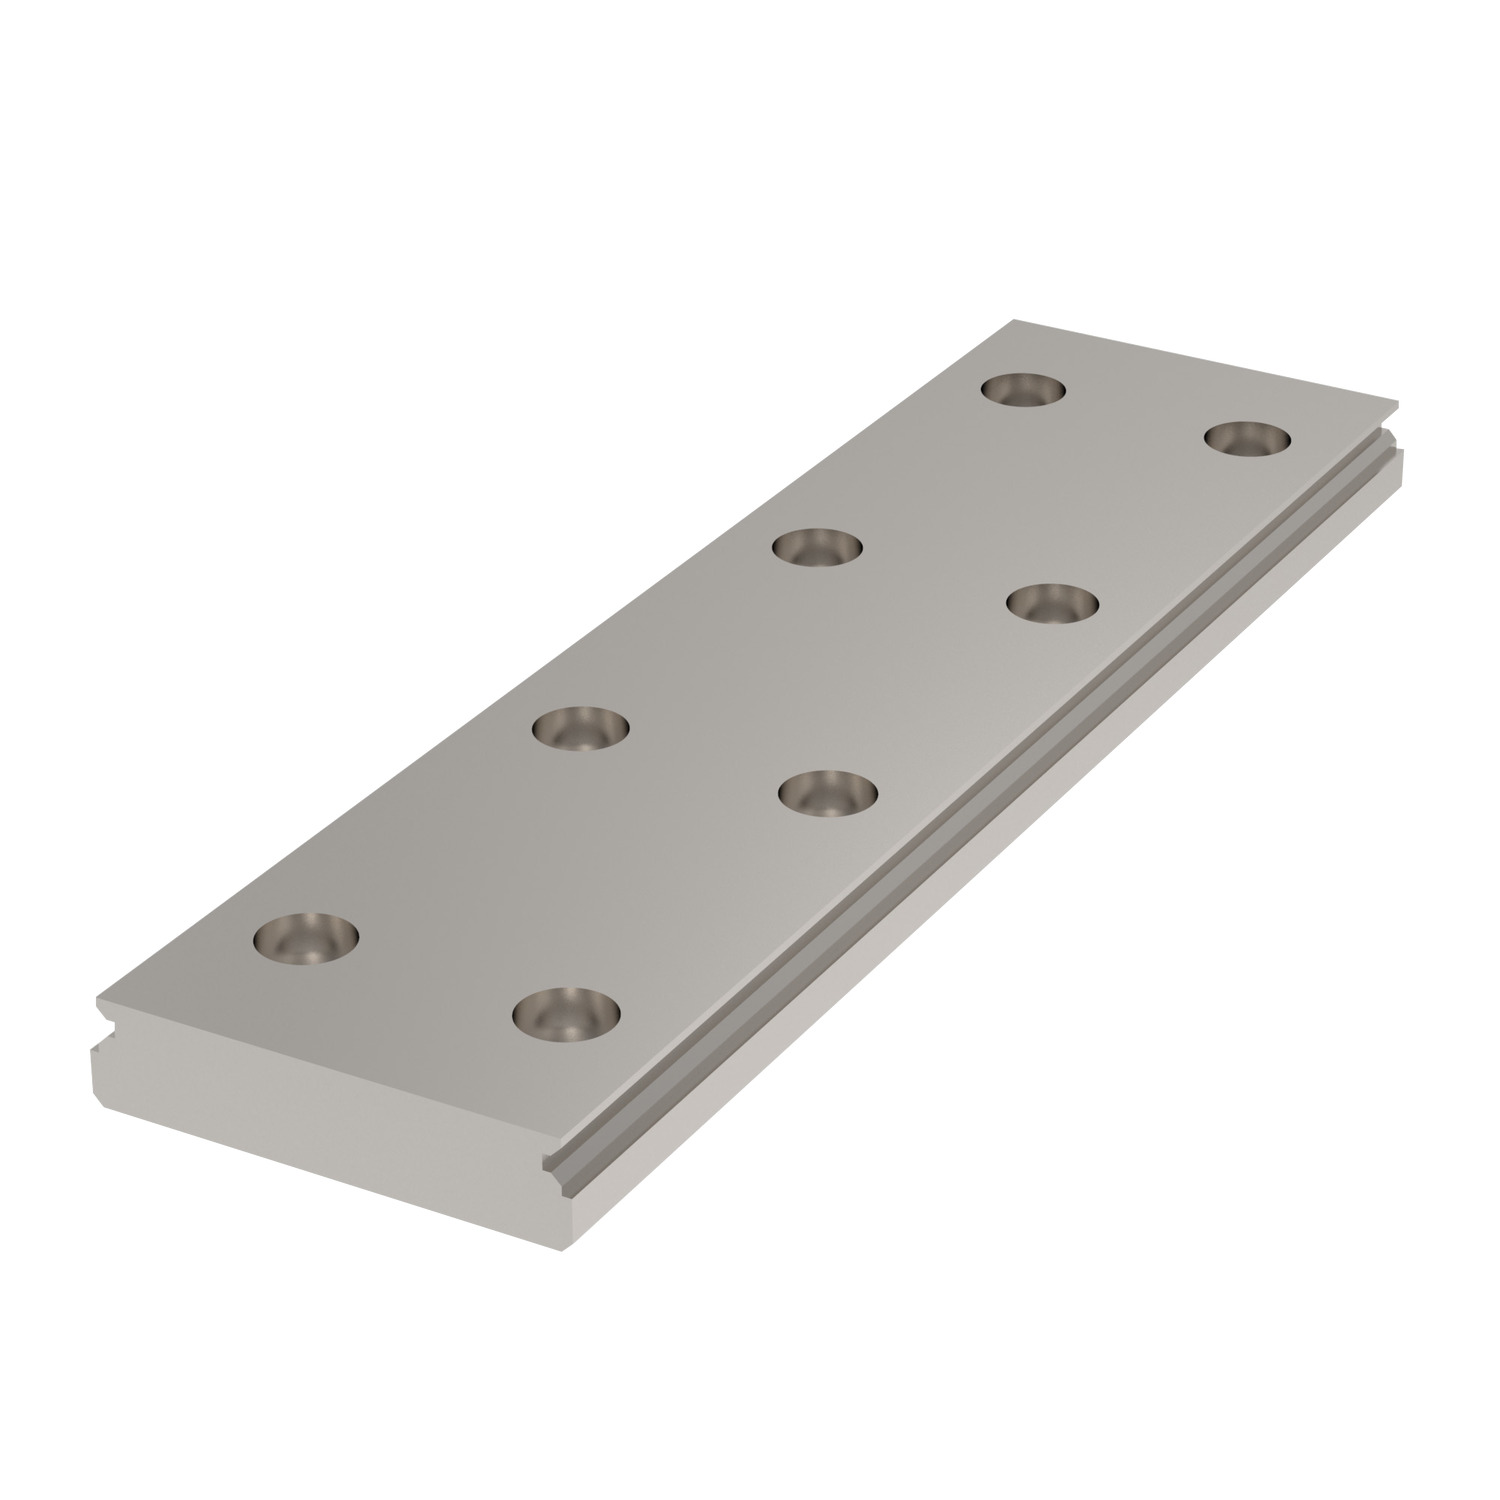 18mm Miniature Linear Rail 18mm miniature linear rails, wide version. Corrosion resistant stainless steel body. Other rail sizes available on request.